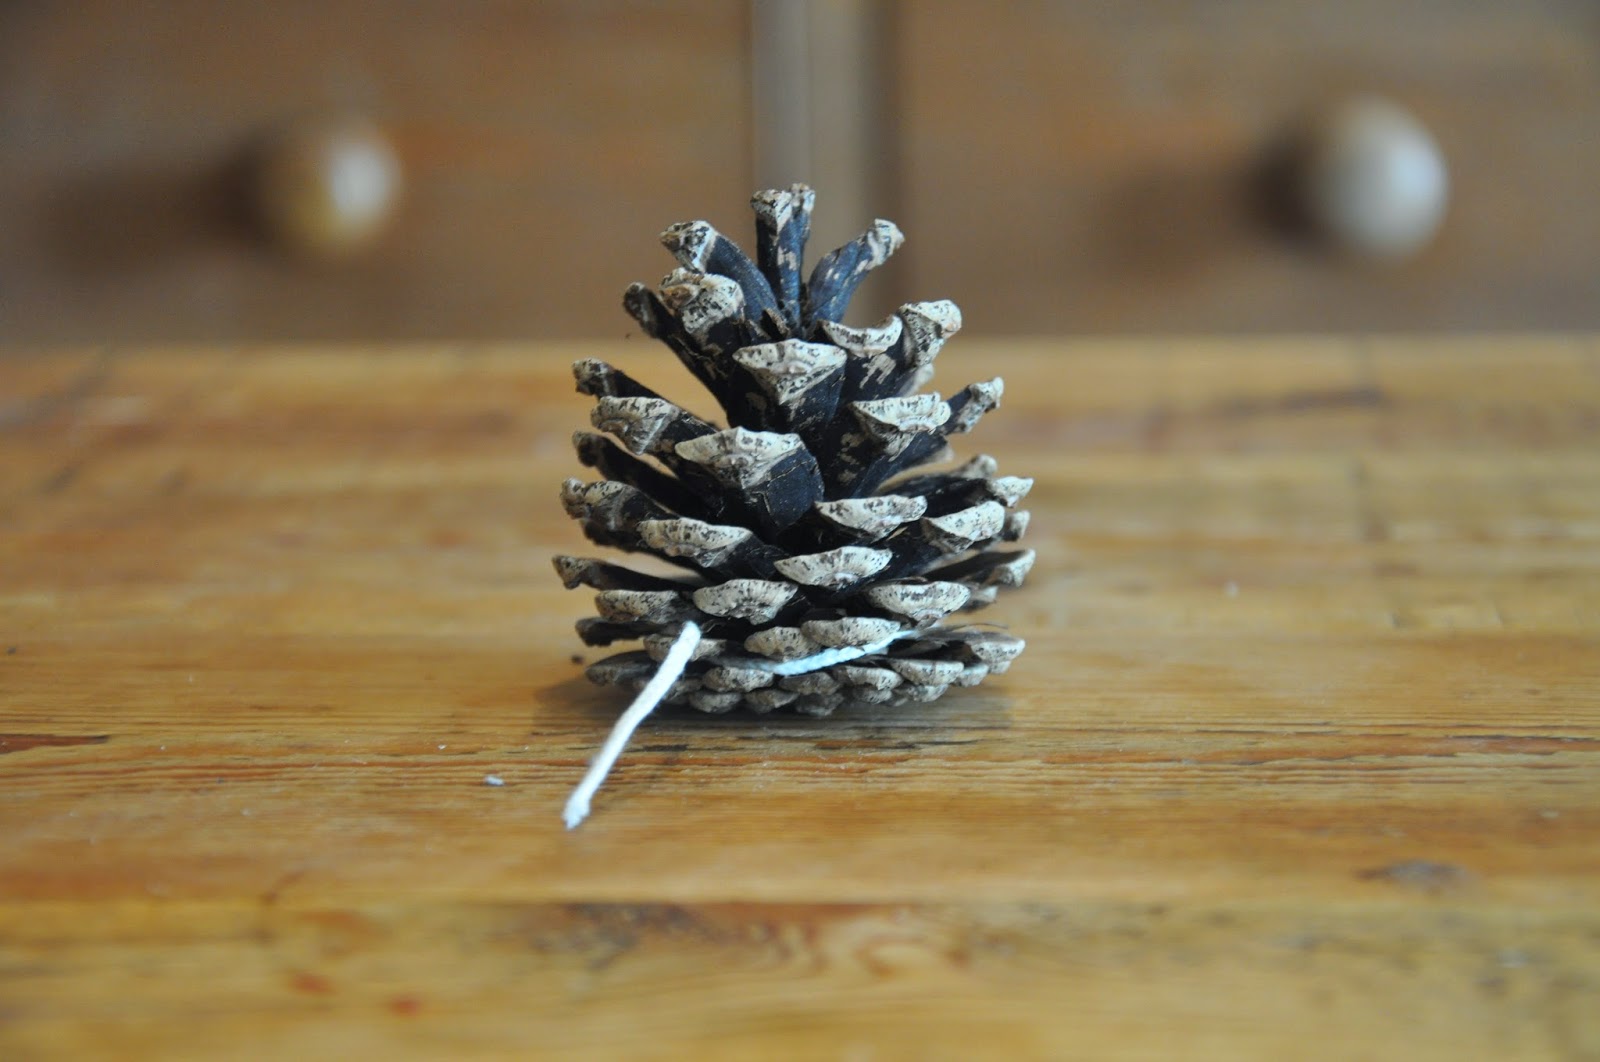 Bradshaw & Sons: HOW TO MAKE PINE CONE FIRELIGHTERS